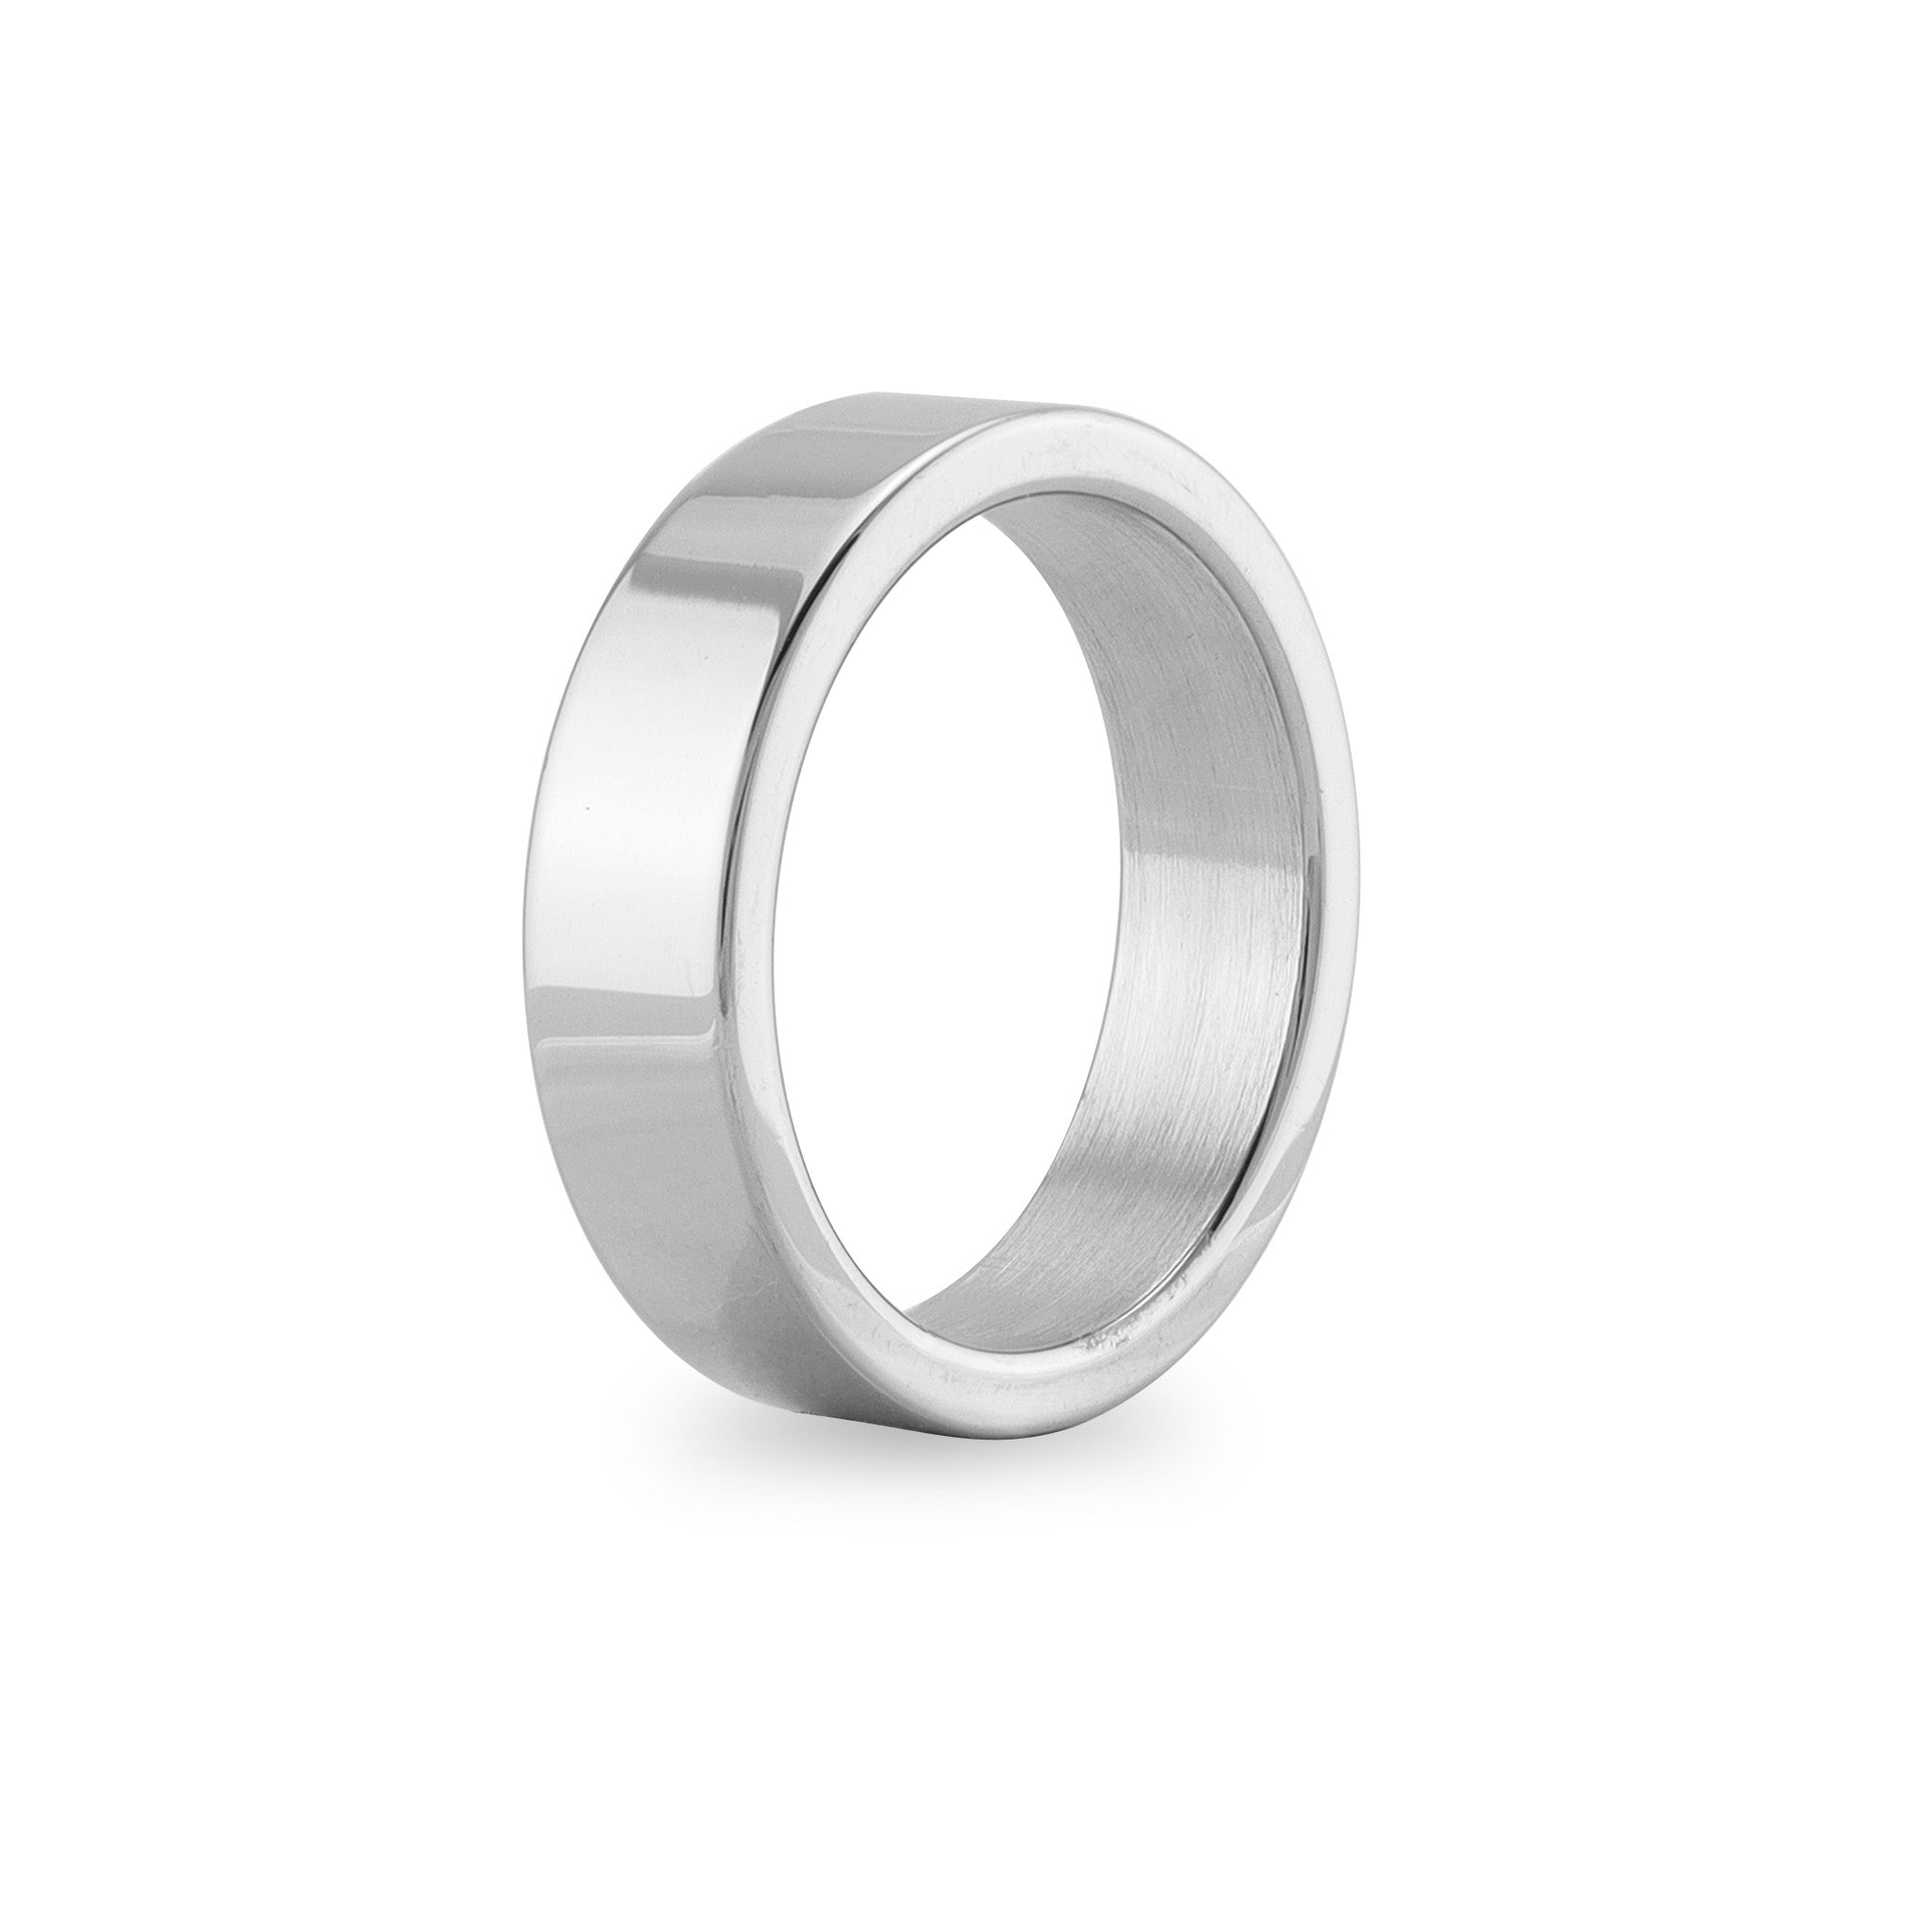 Polished Stainless Steel Blank Flat Ring / PRJ9005